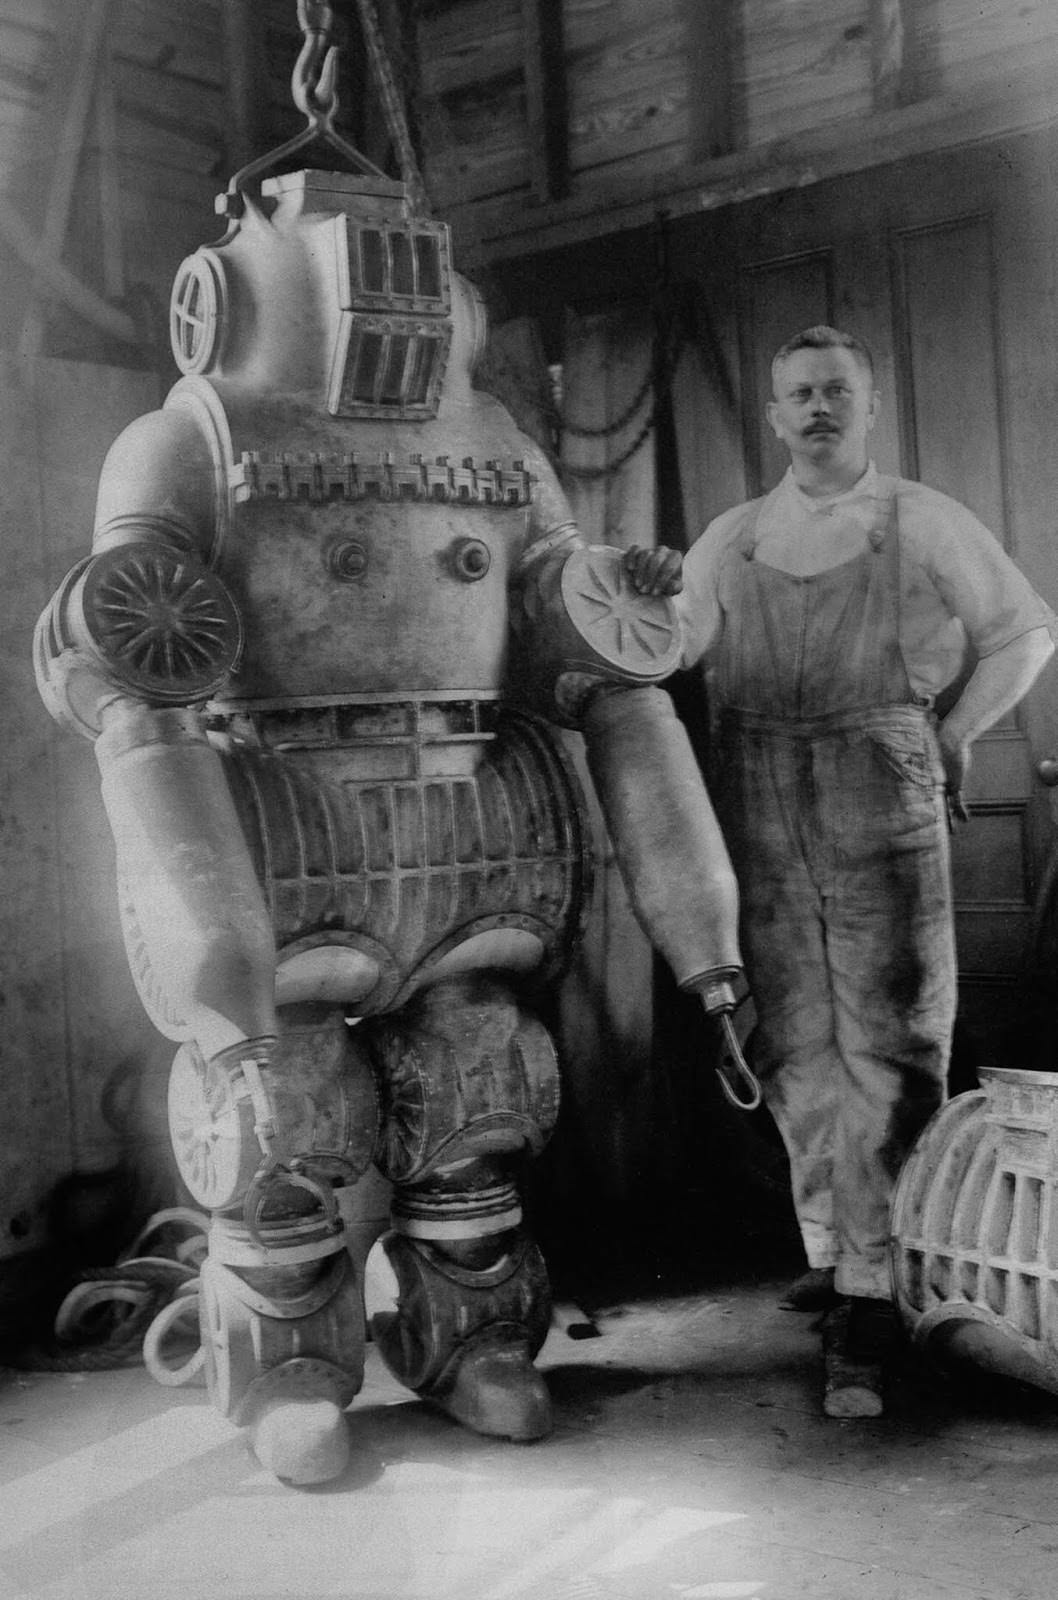 In 1914, Chester MacDuffee constructed the first suit with ball bearings, as the medium to provide movement to a joint.